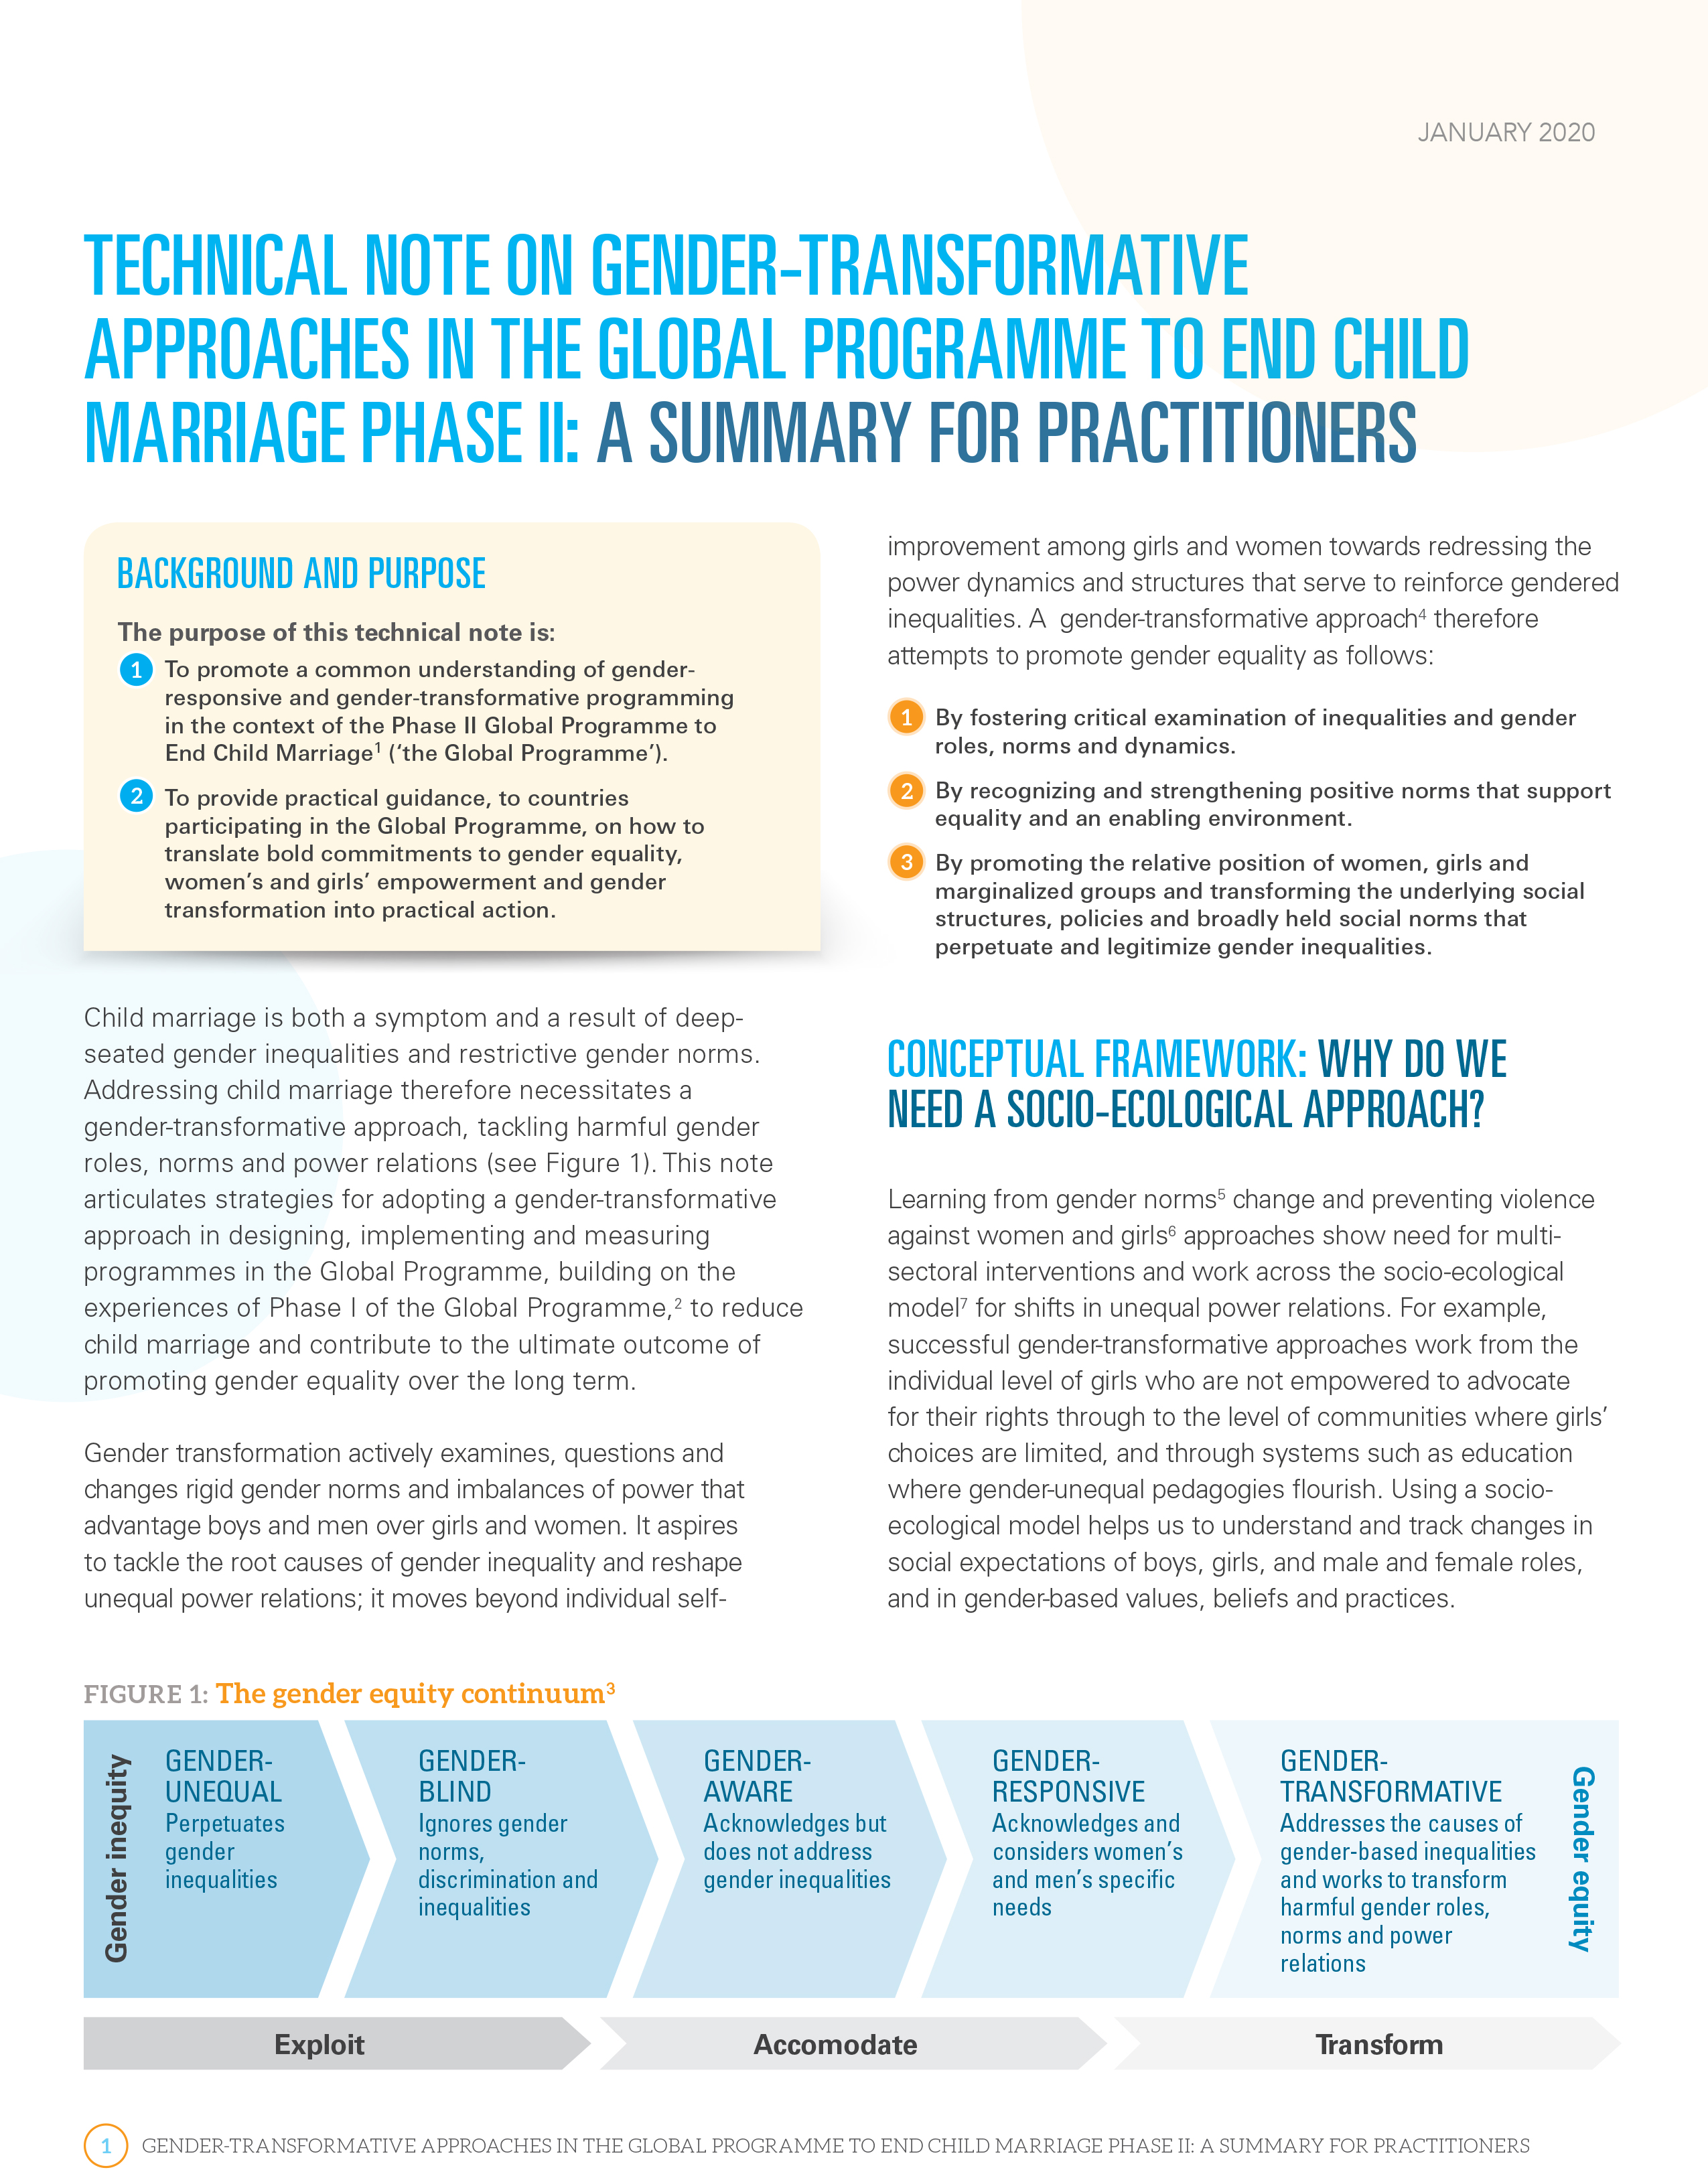 Technical Note on Gender-Transformative Approaches: A summary for practitioners